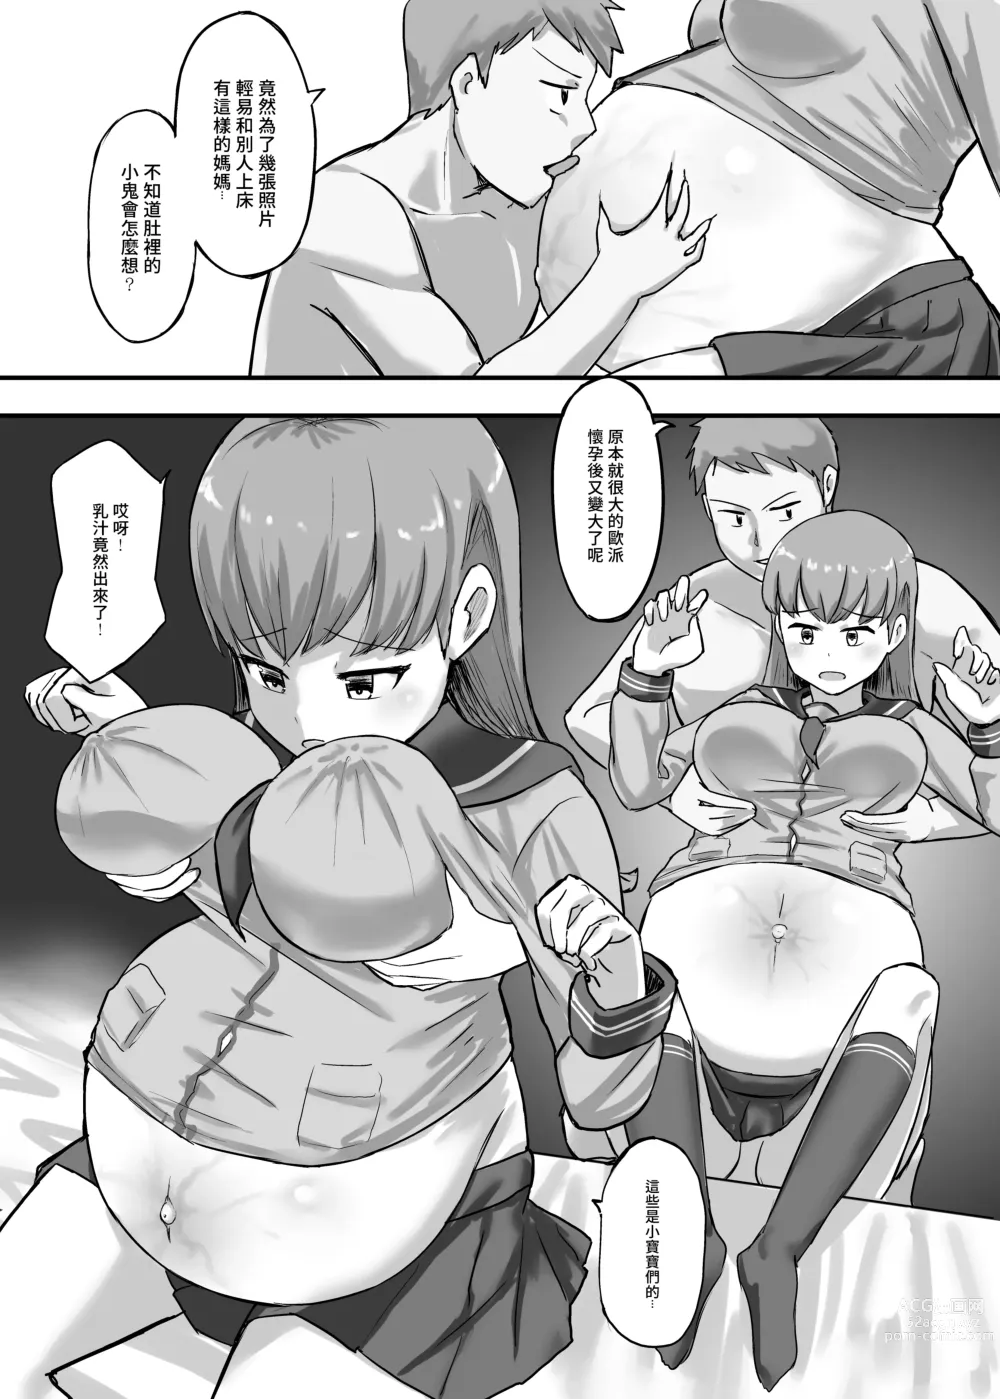 Page 8 of doujinshi Oi who was tempted